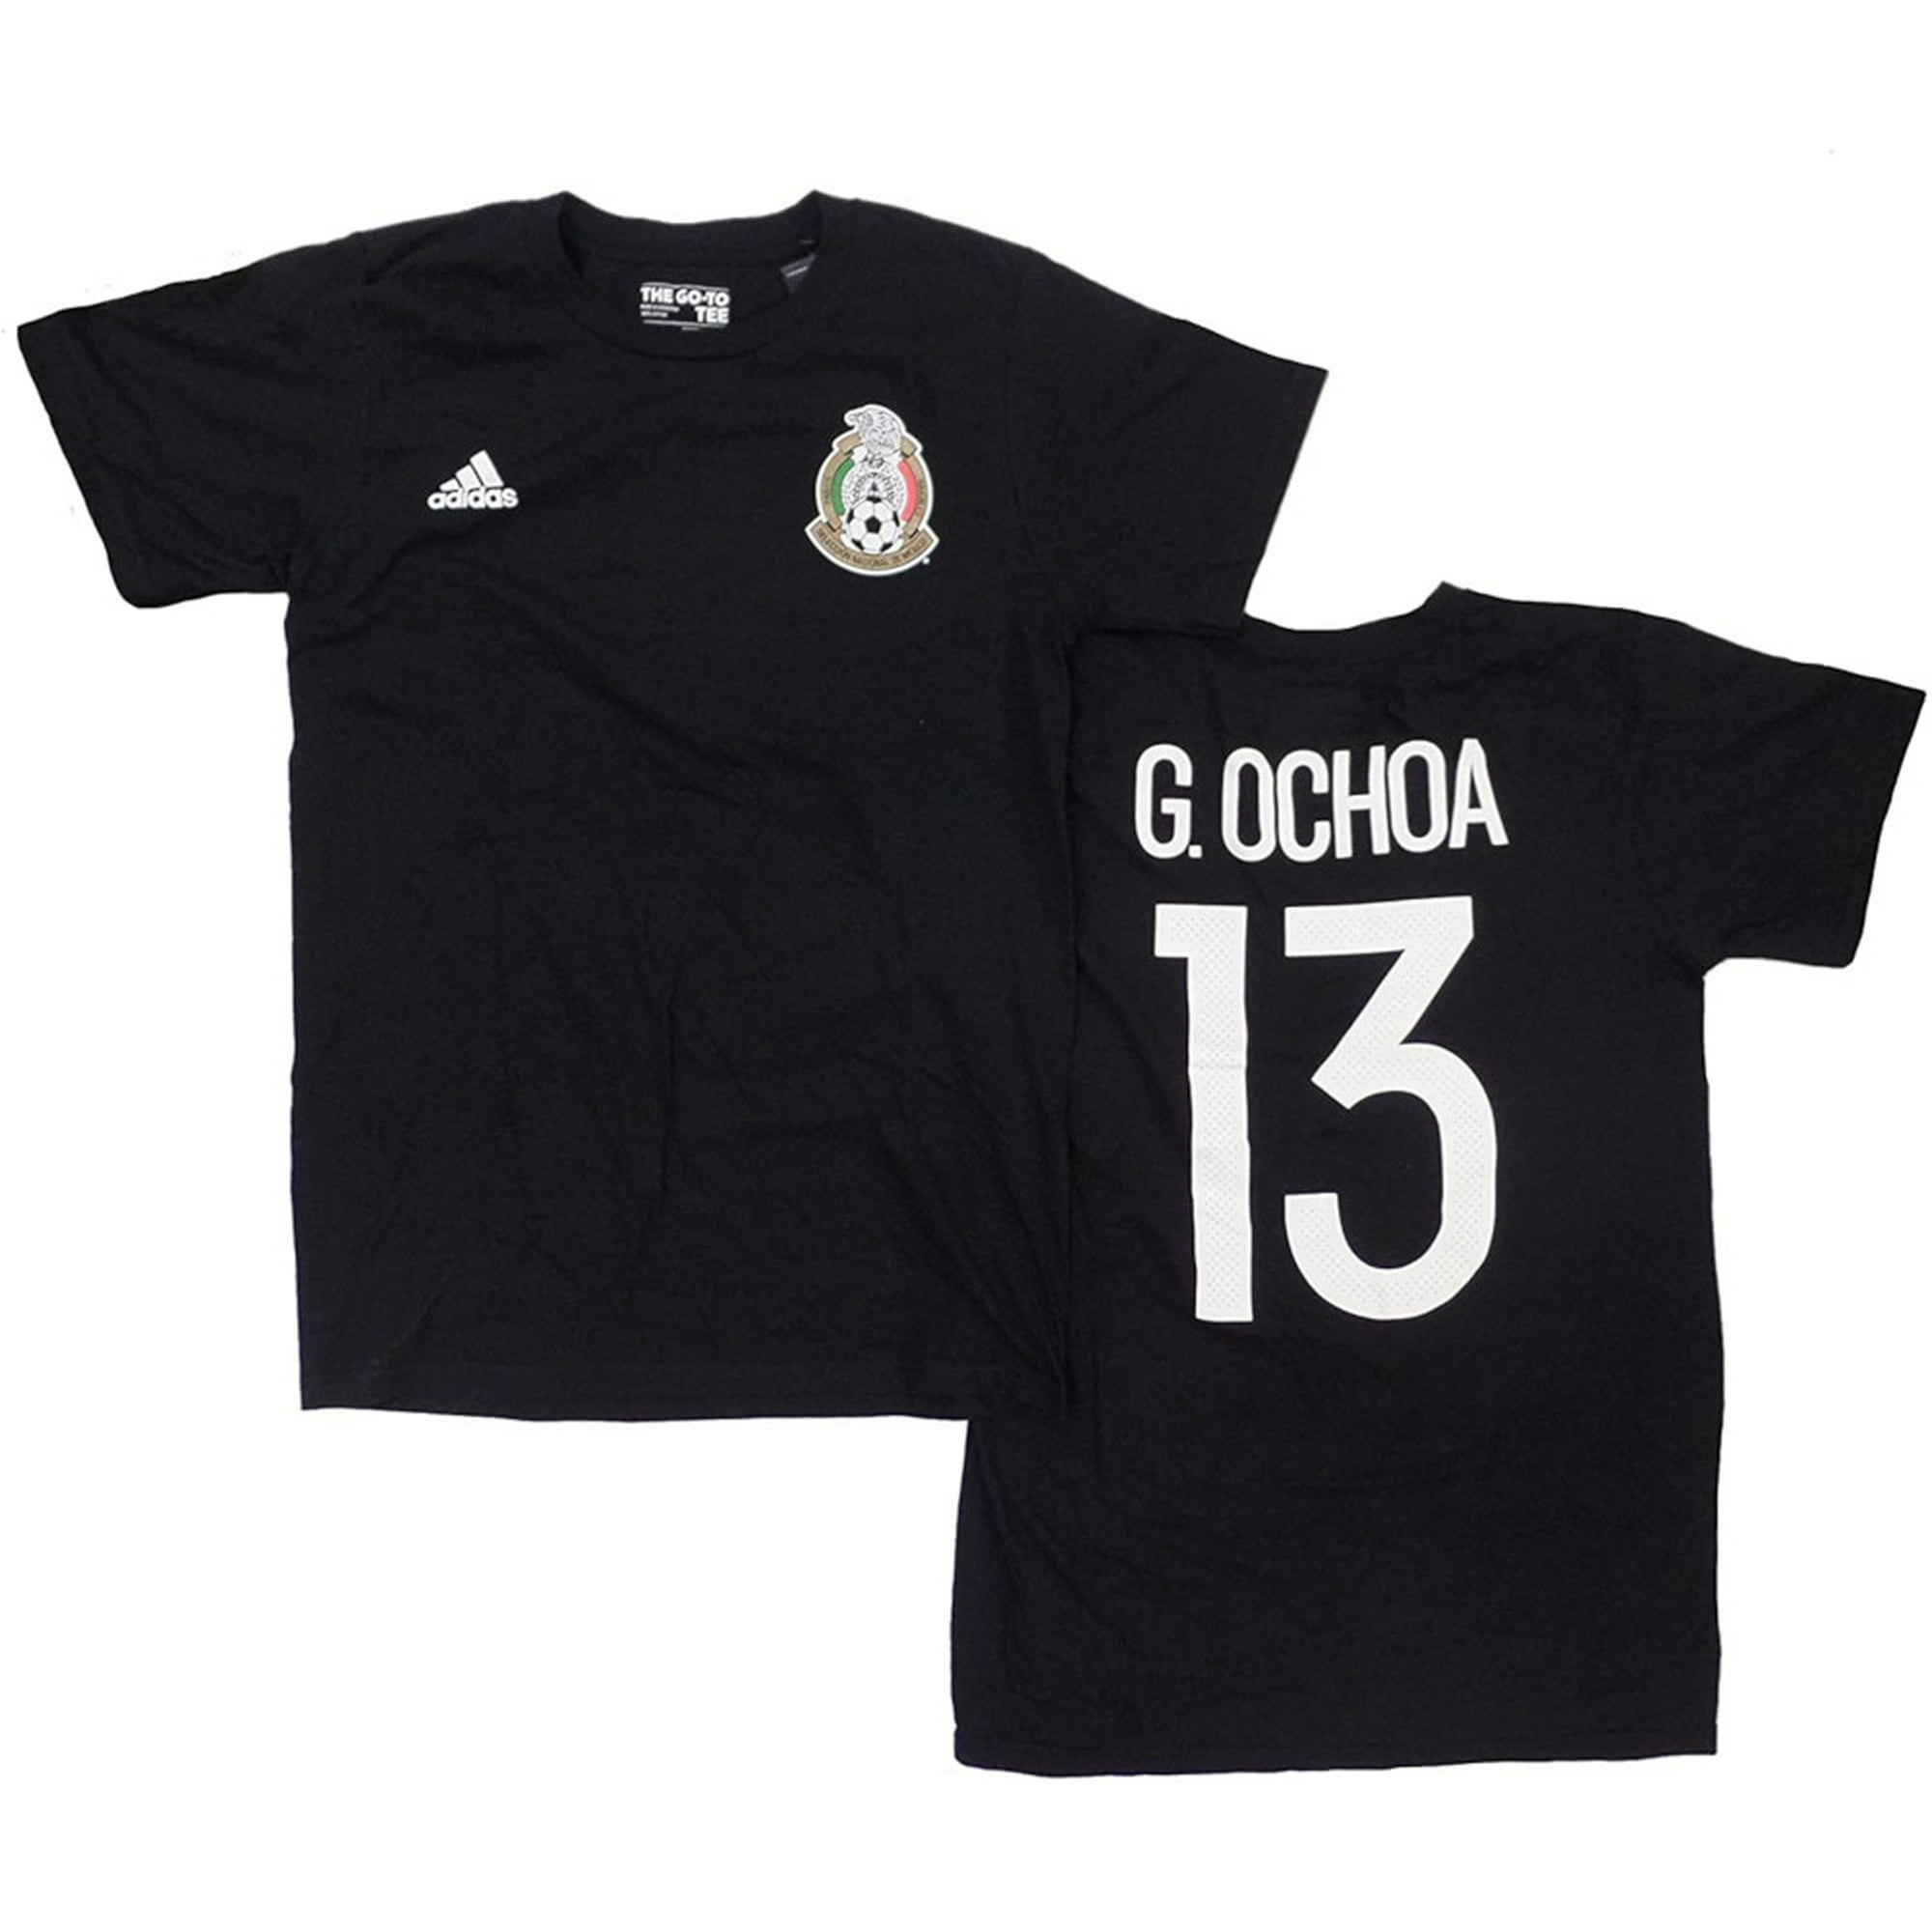 new mexico jersey world cup